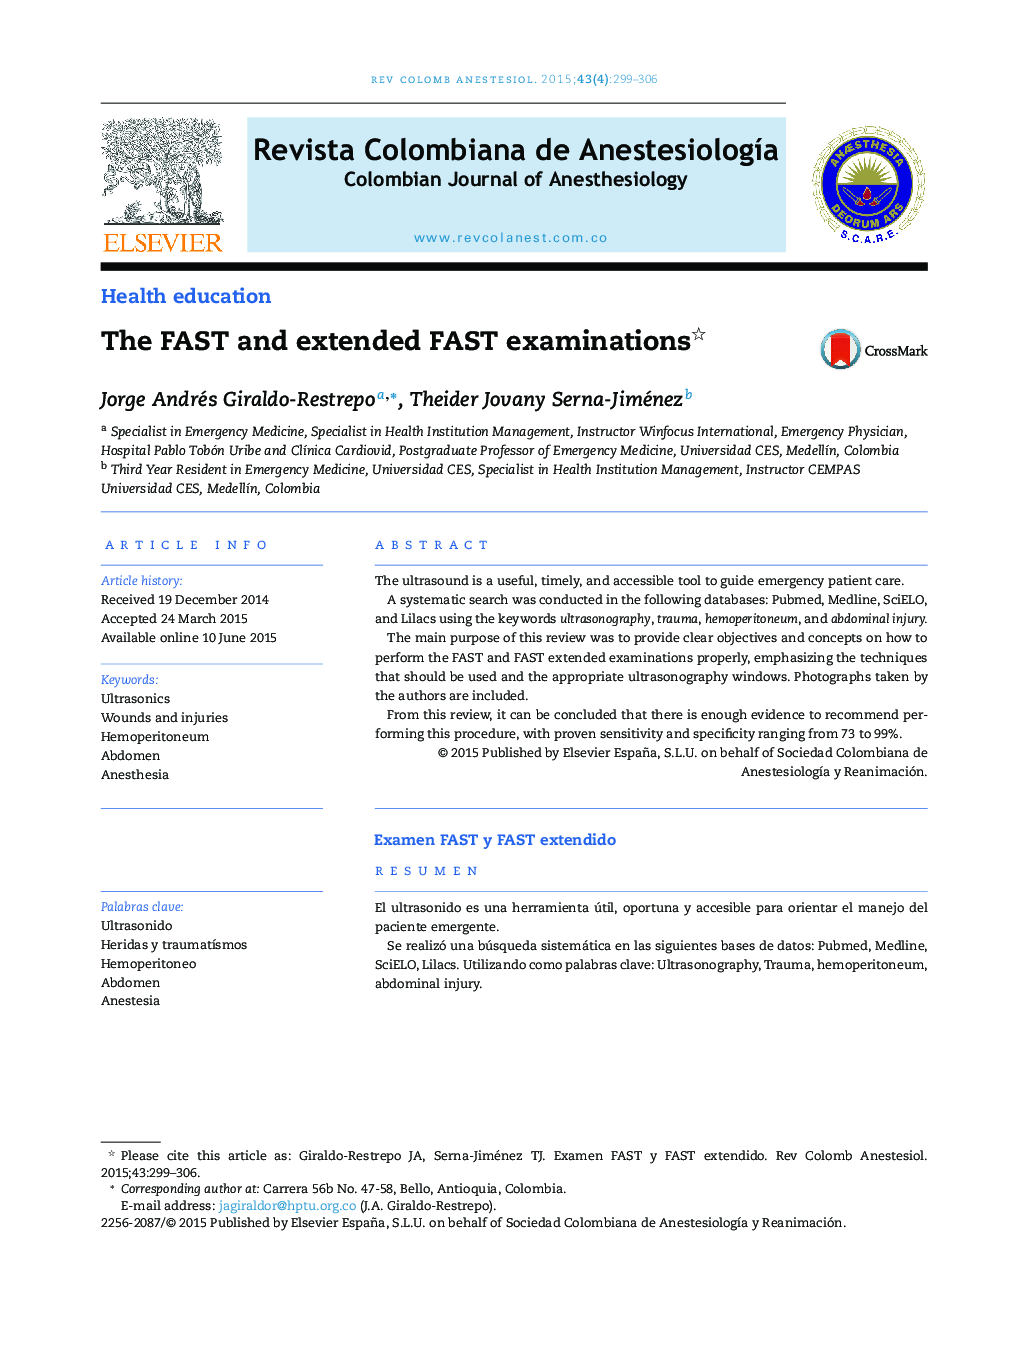 The FAST and extended FAST examinations 